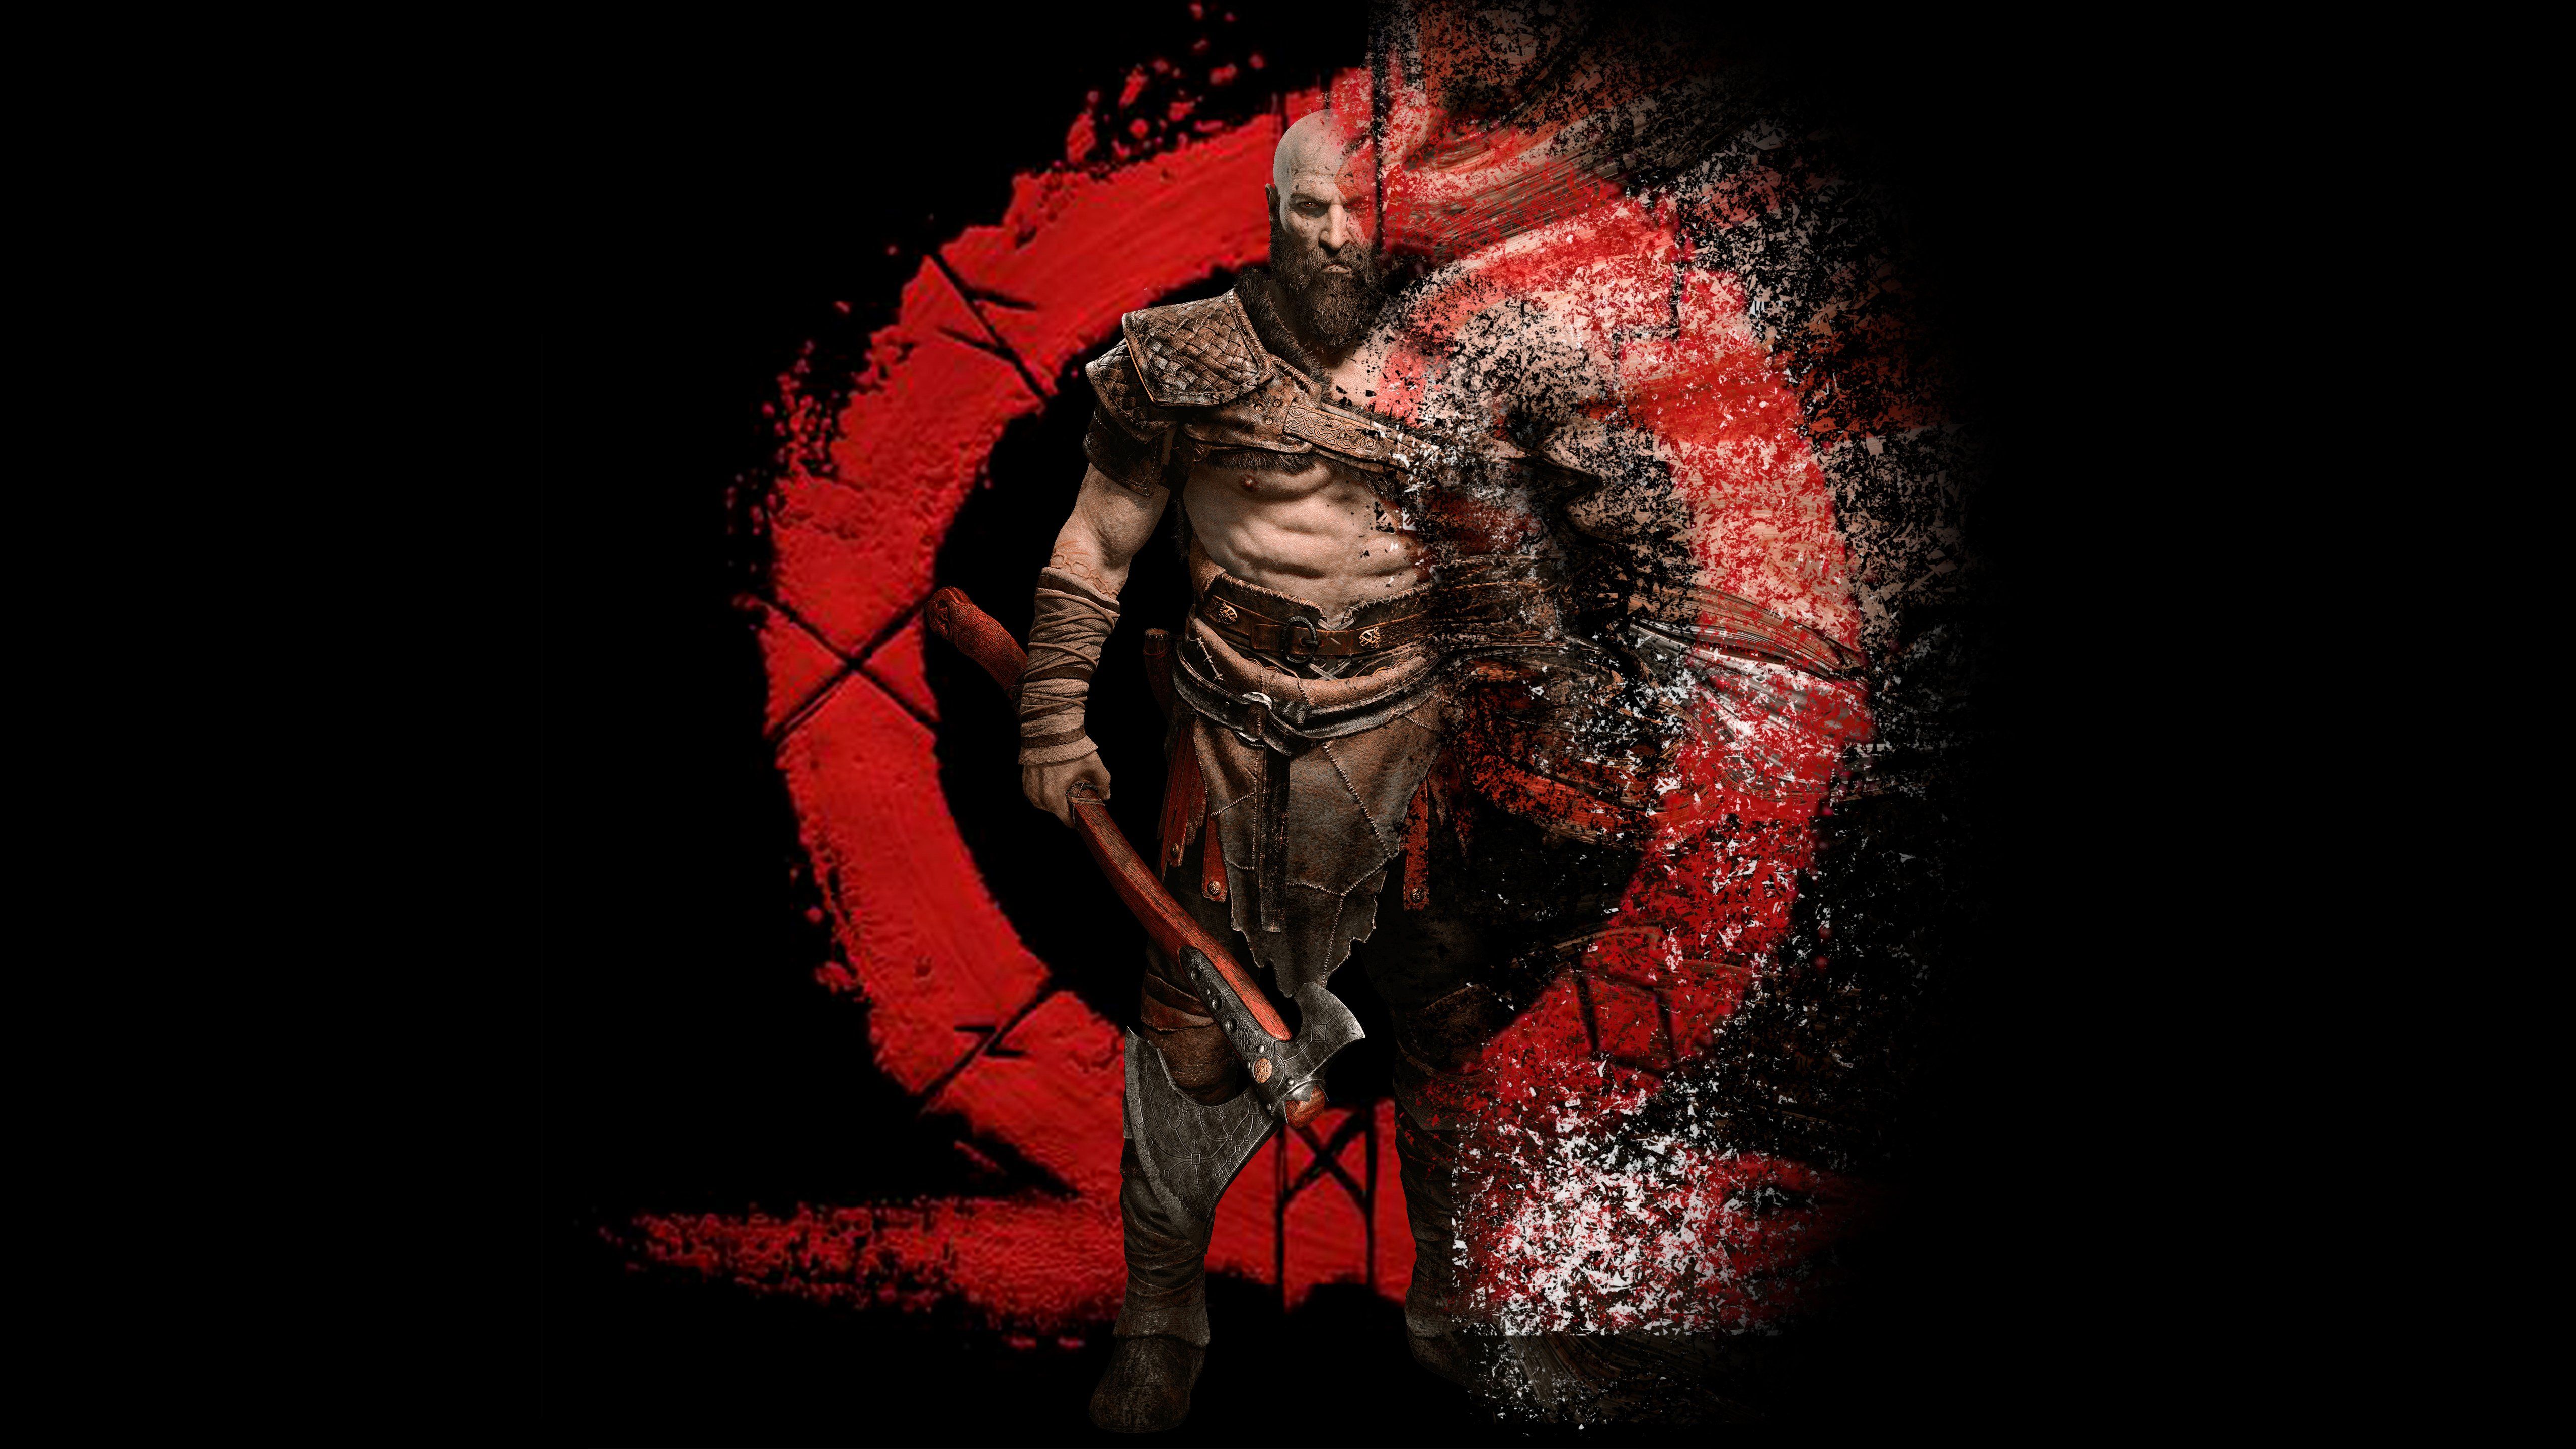 Kratos 4K wallpaper for your desktop or mobile screen free and easy to download